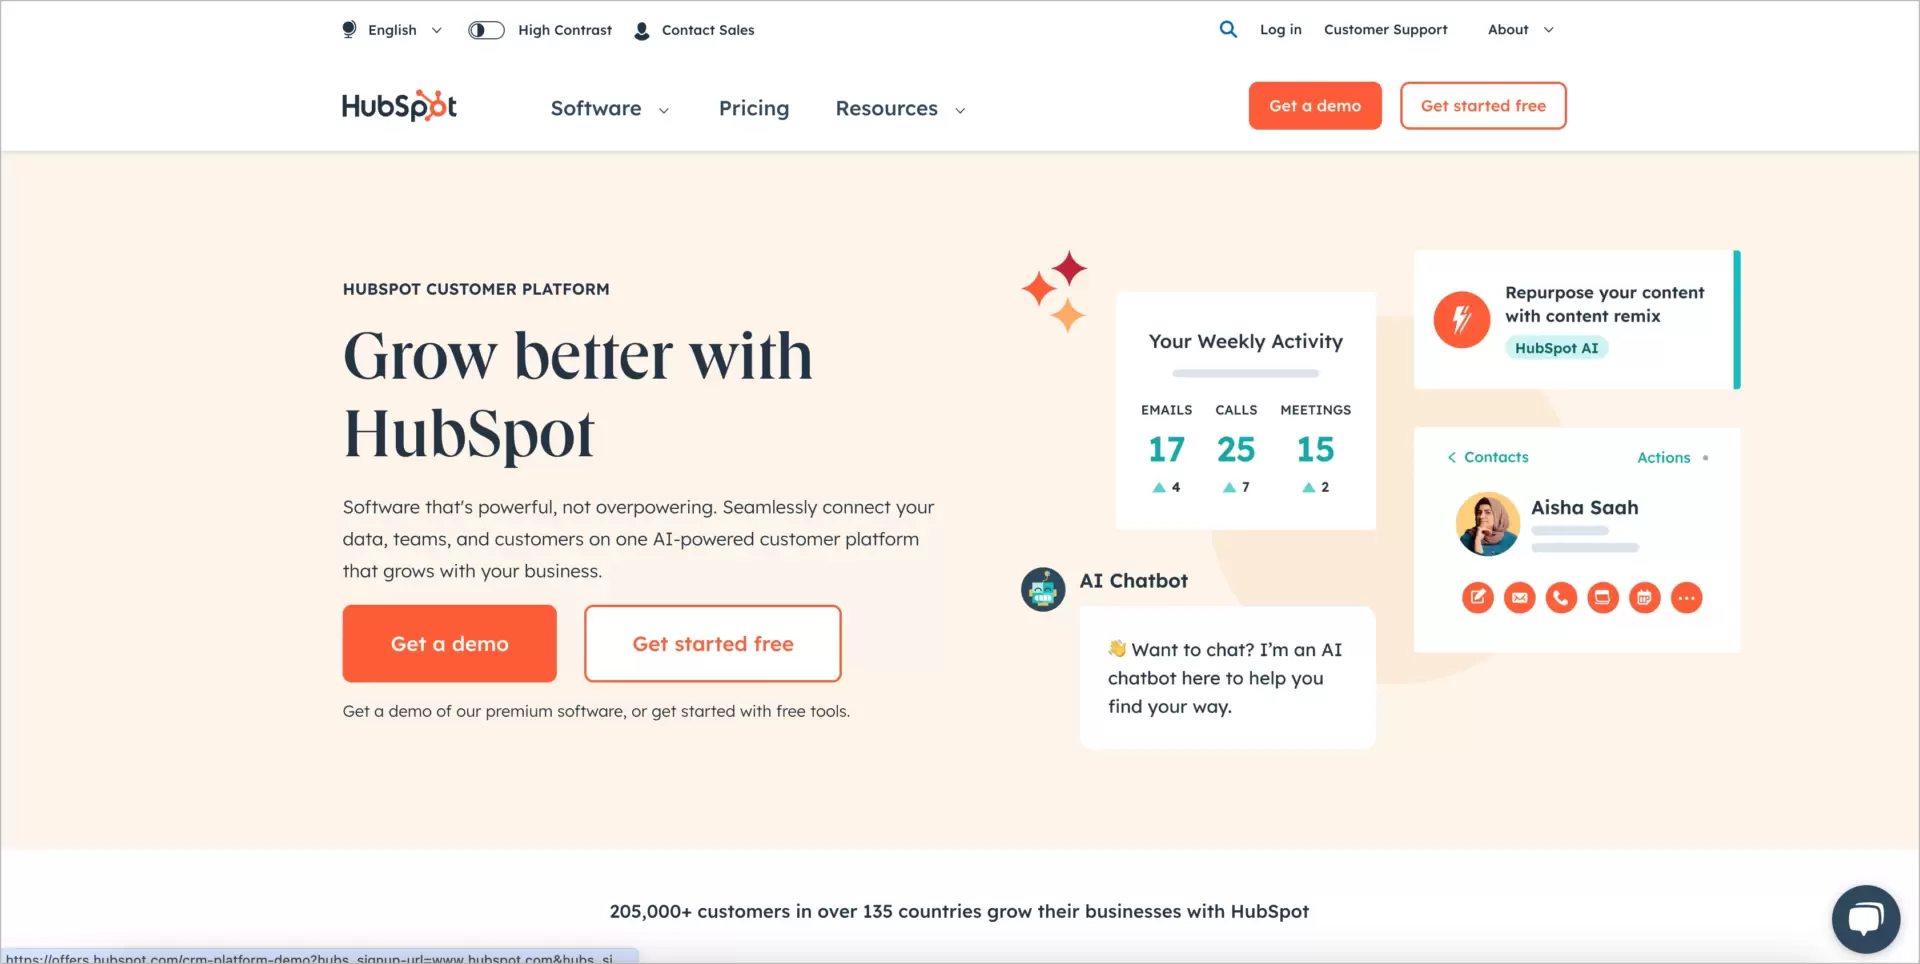 Hubspot CRM and marketing automation software